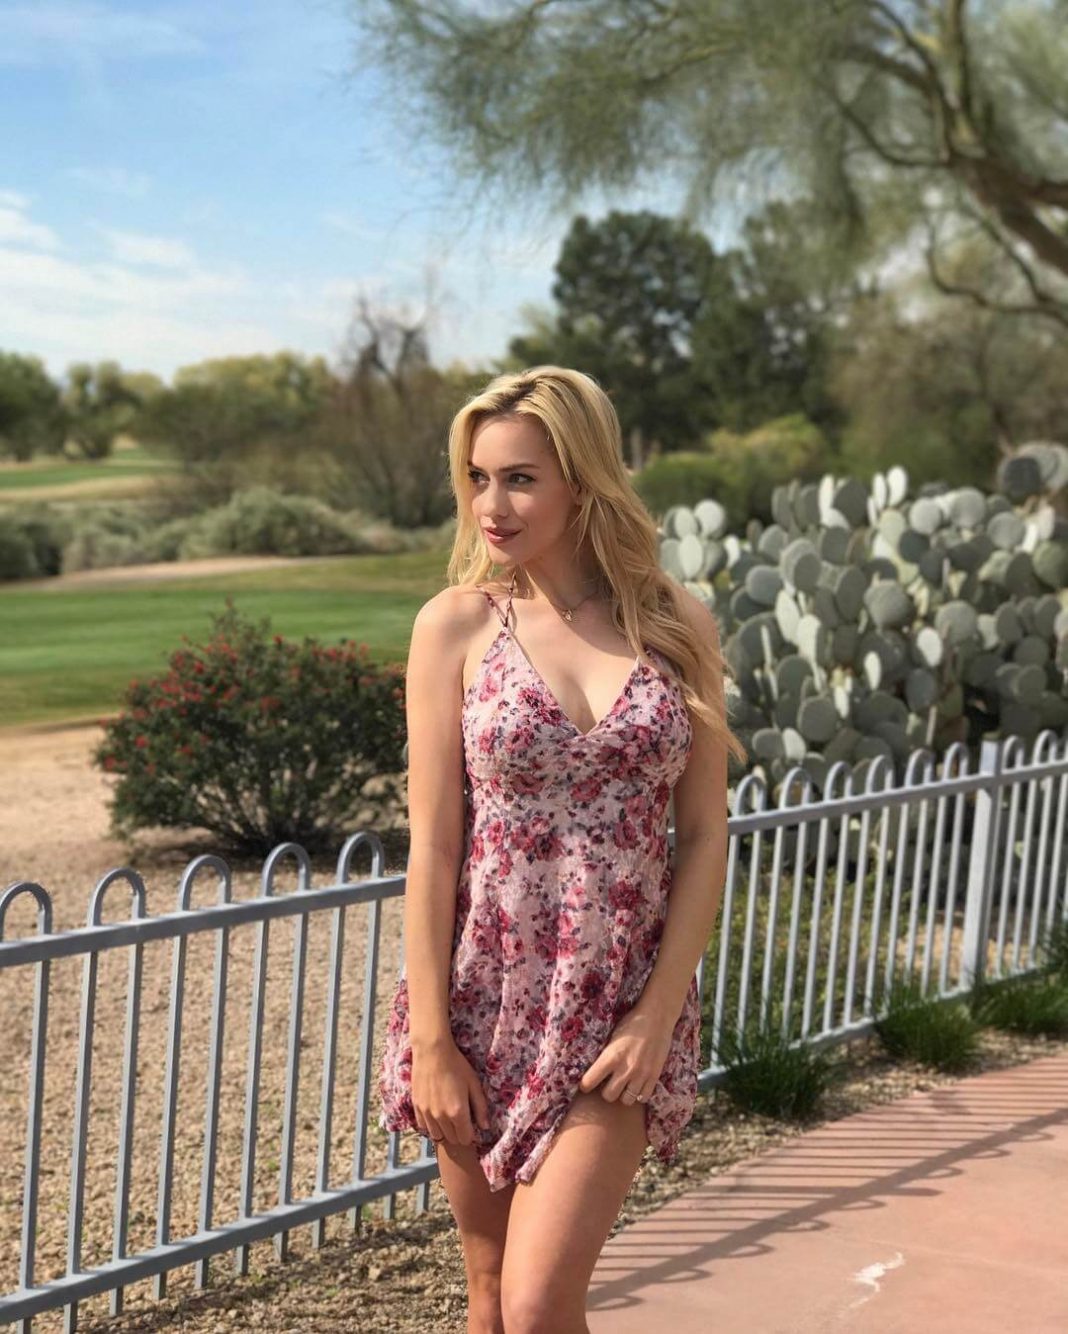 51 Paige Spiranac Nude Pictures Brings Together Style, Sassiness And Sexiness 120